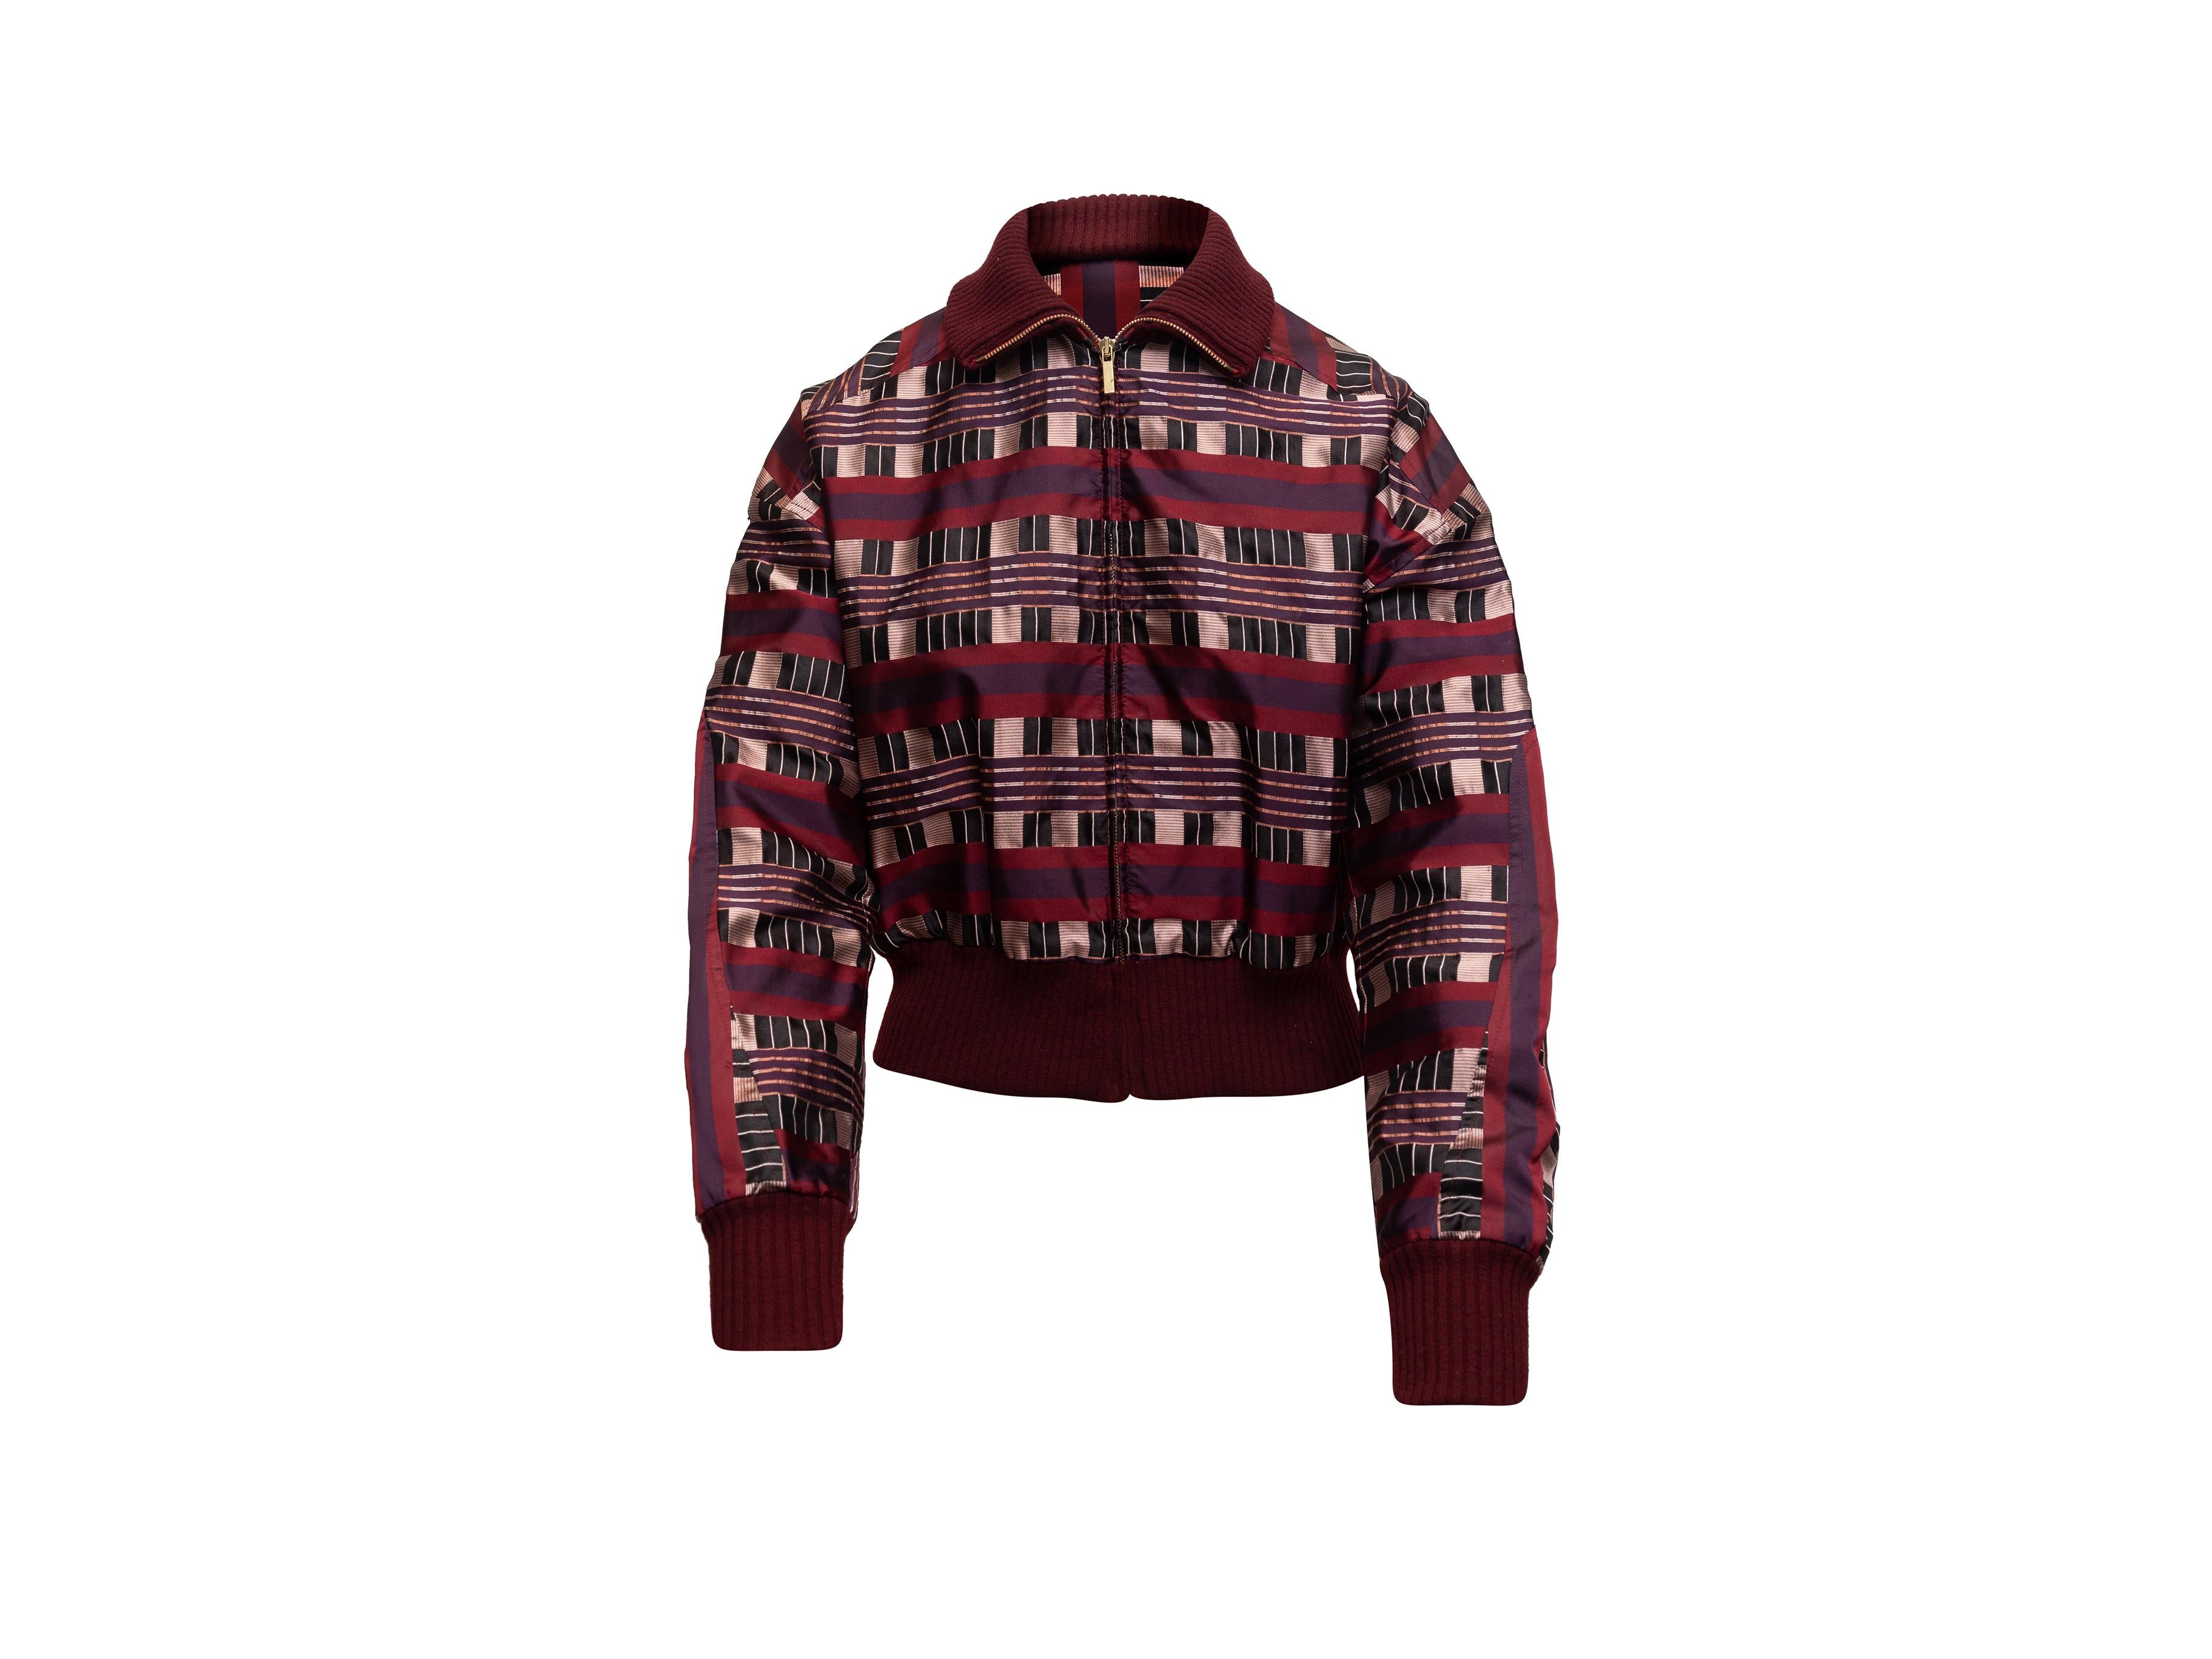 Product details: Maroon and multicolor silk bomber jacket by Carolina Herrera. Geometric pattern throughout. Rib knit trim. Zip closure at center front. 40